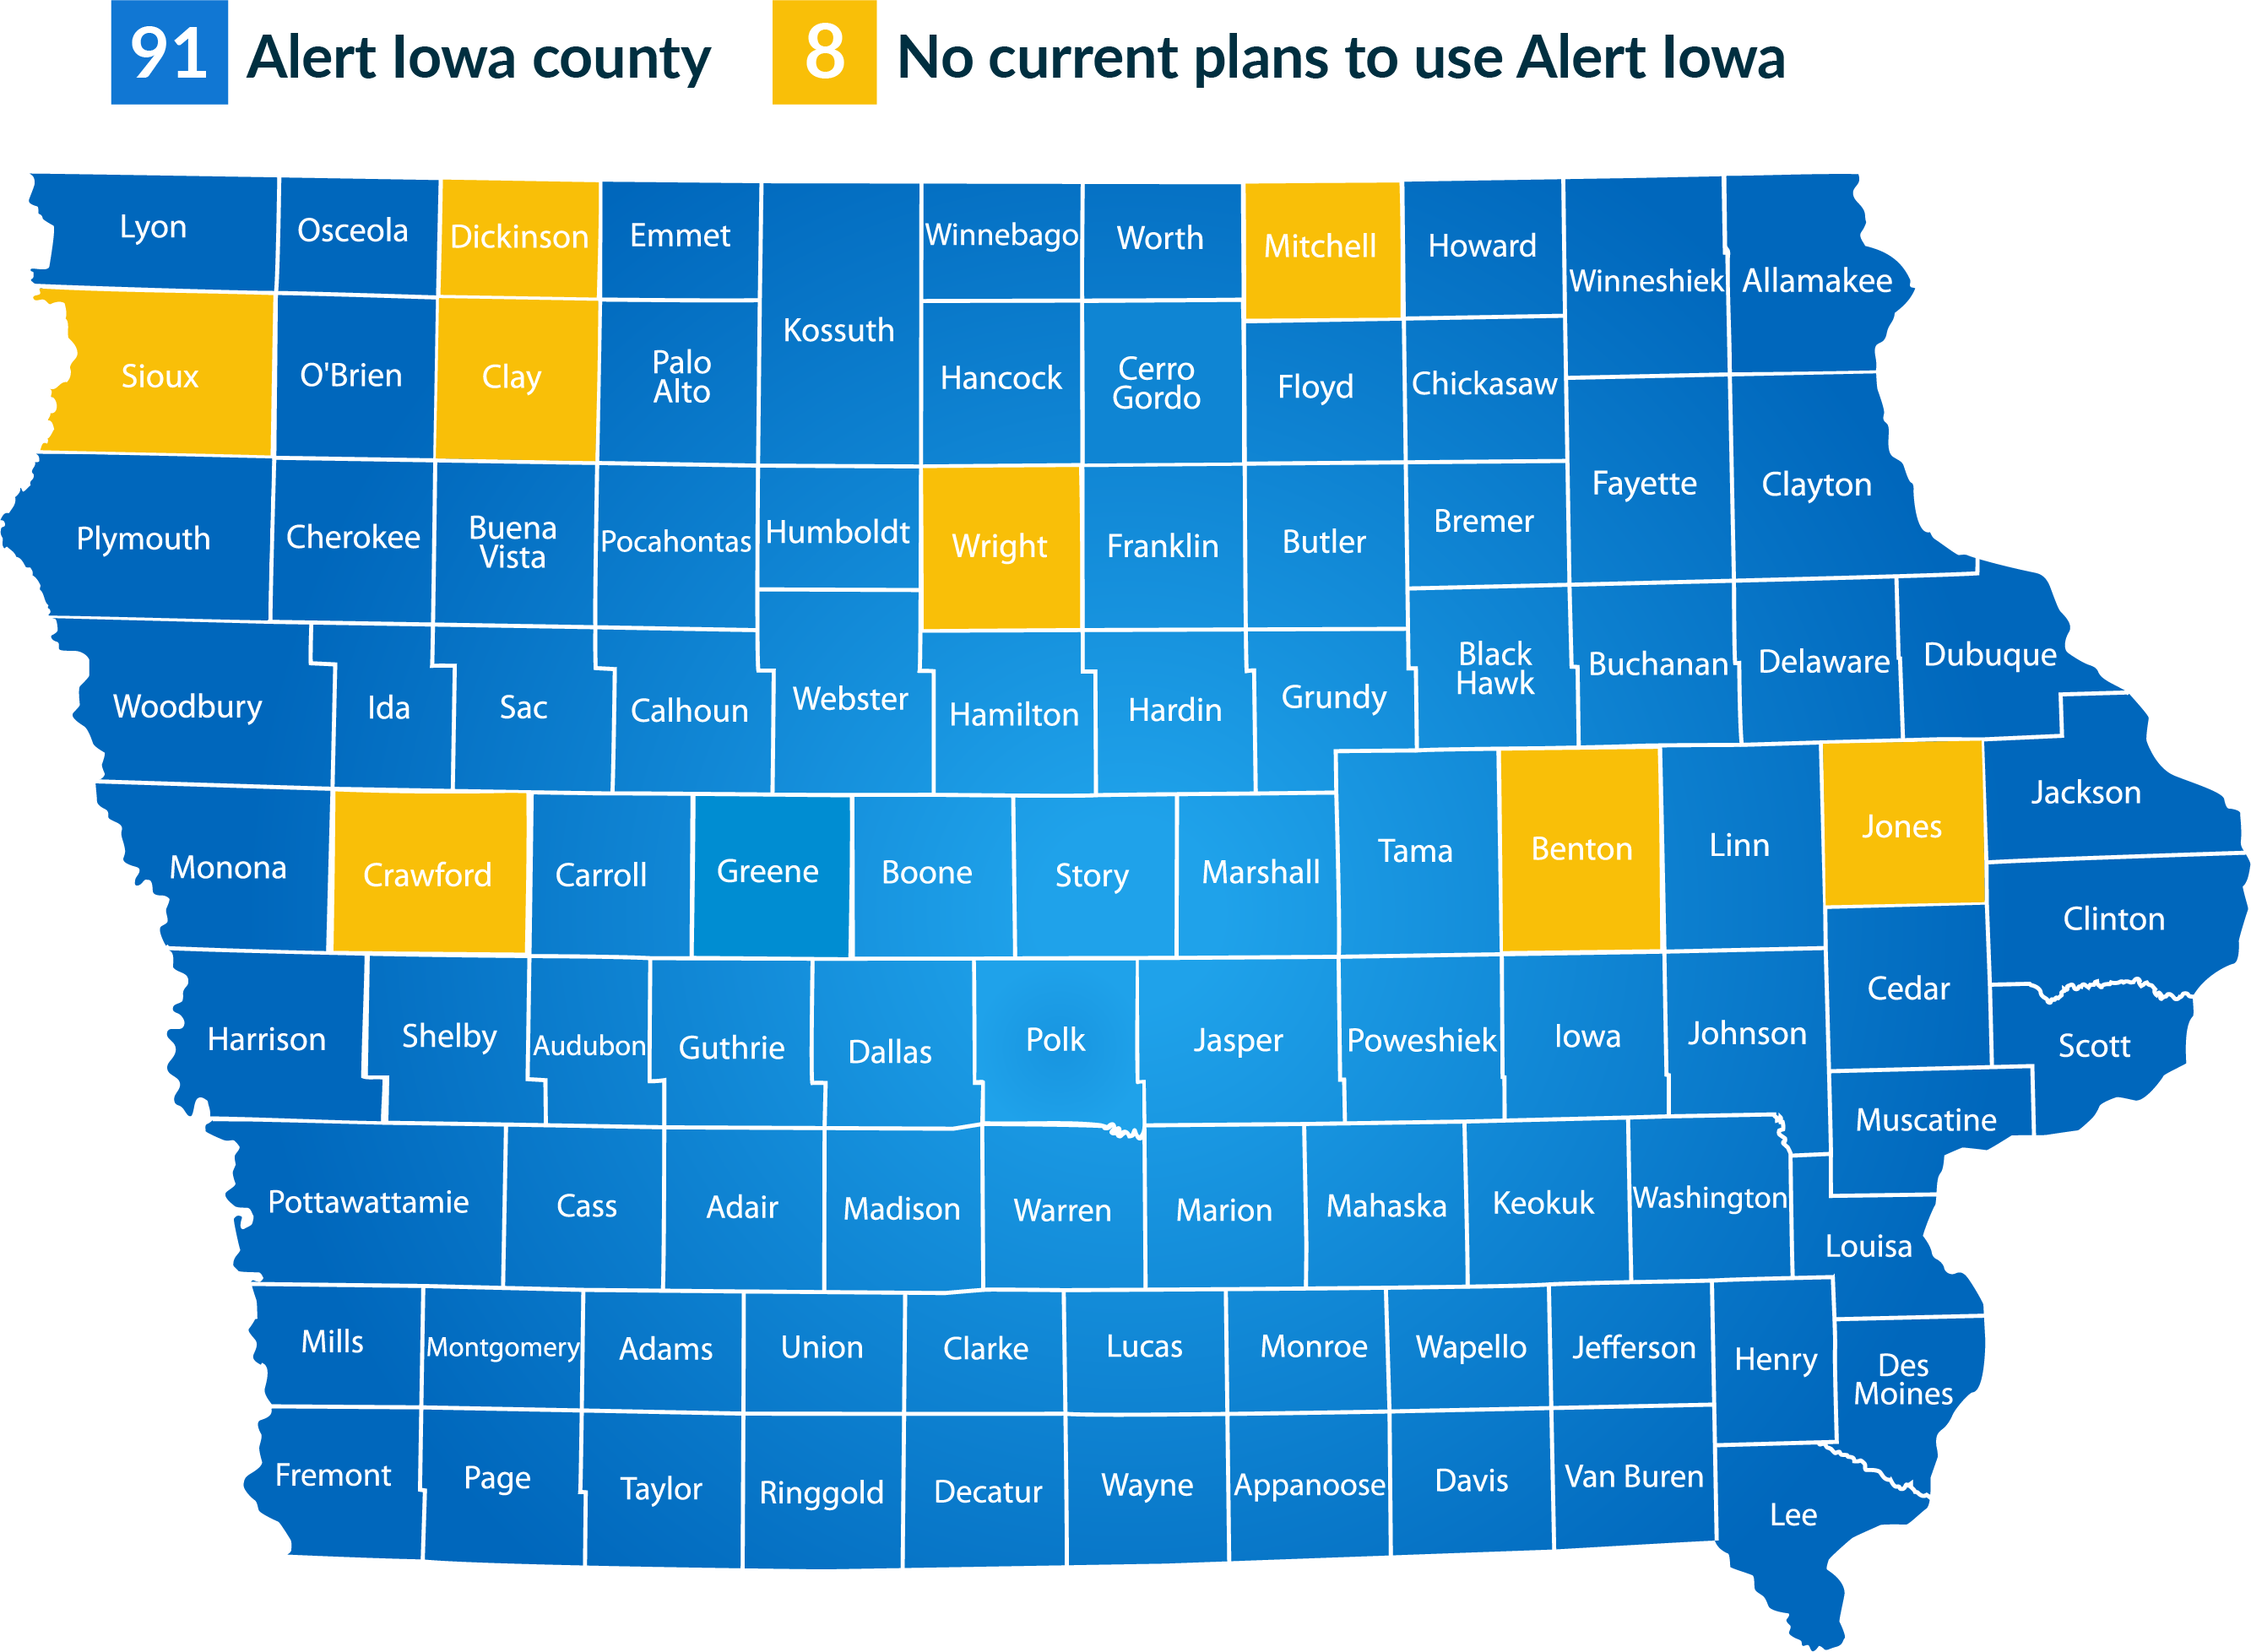 Alert Iowa County Map, 91 Alert Iowa Counties, 8 Counties with no current plans to use Alert Iowa including Sioux, Dickinson, Clay, Crawford, Wright, Mitchell, Benton and Jones